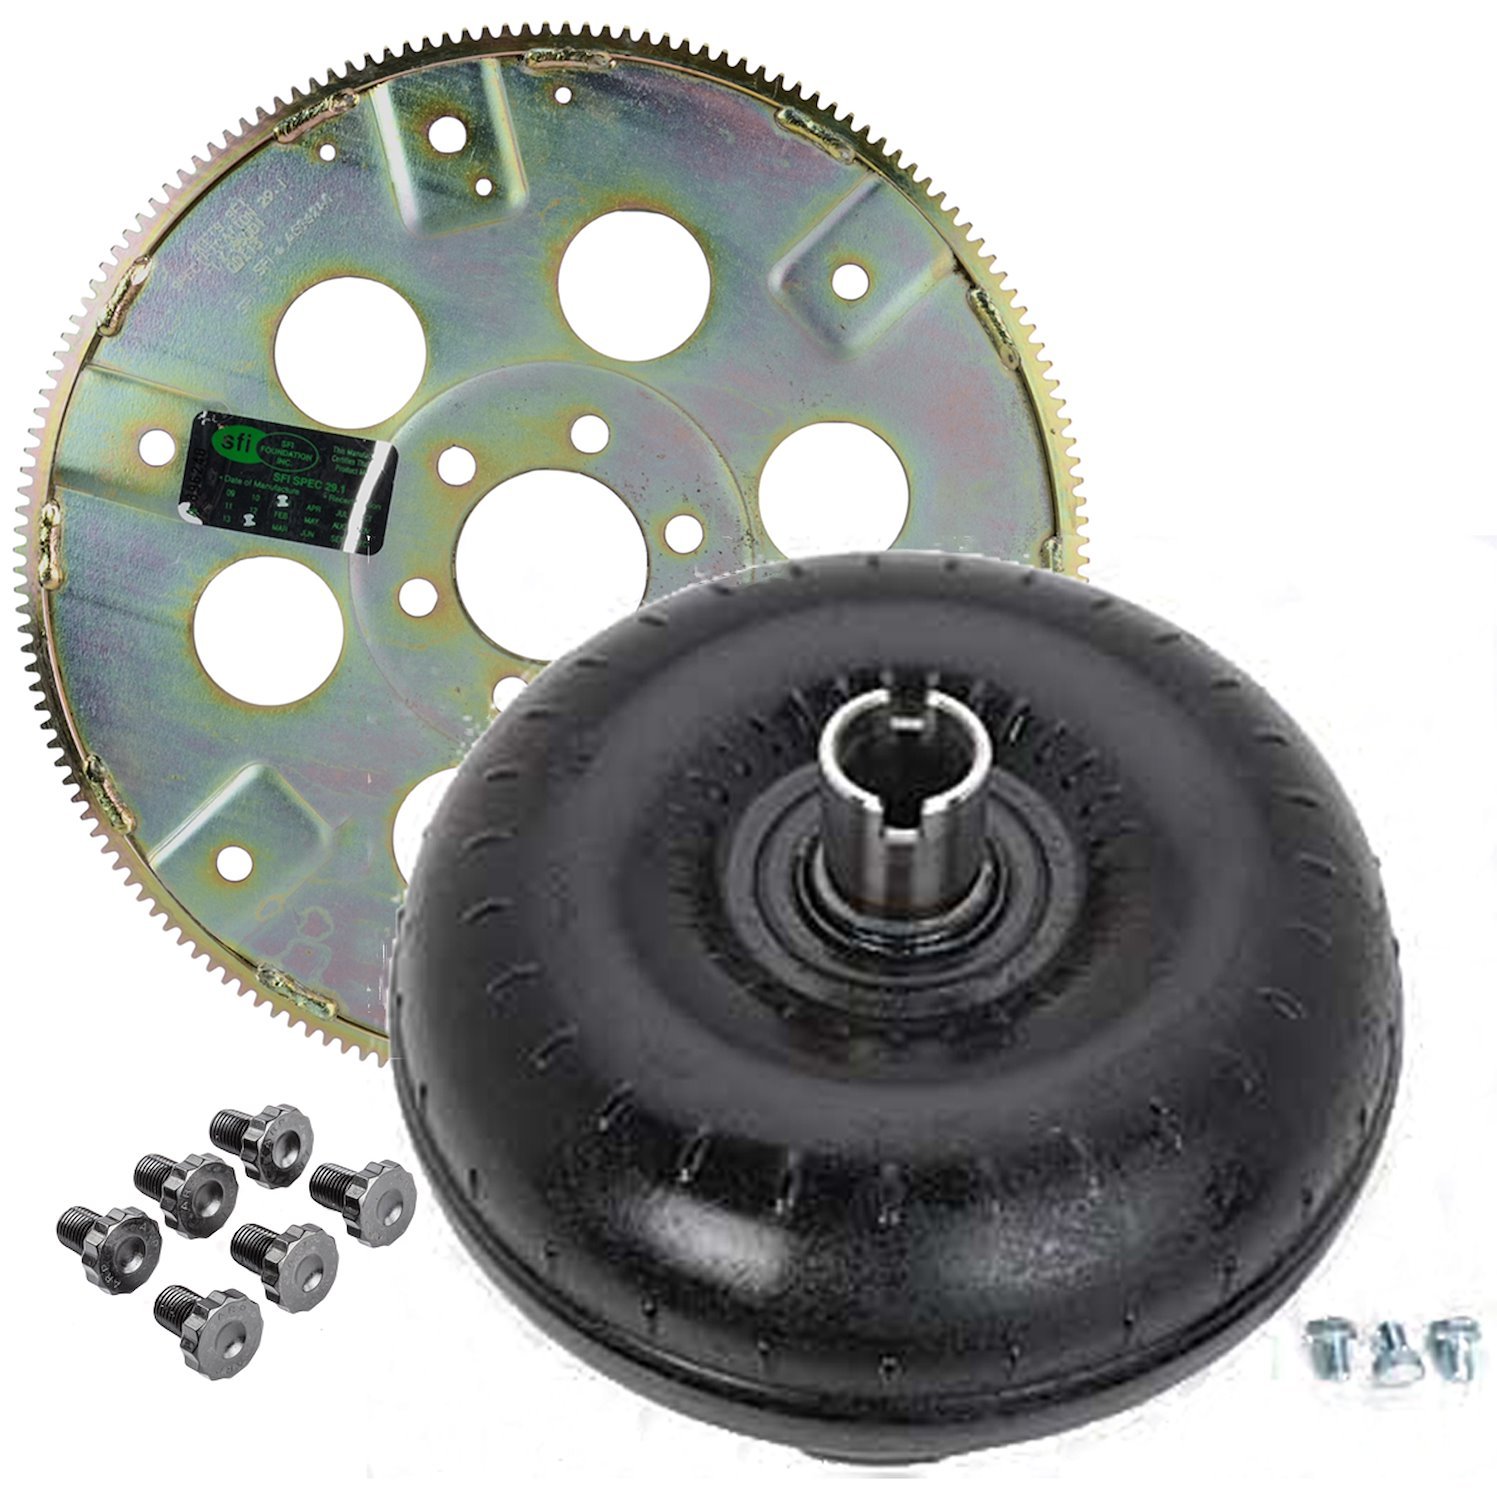 Torque Converter Kit for GM TH350/TH400 [2300-2700 RPM Stall Speed]